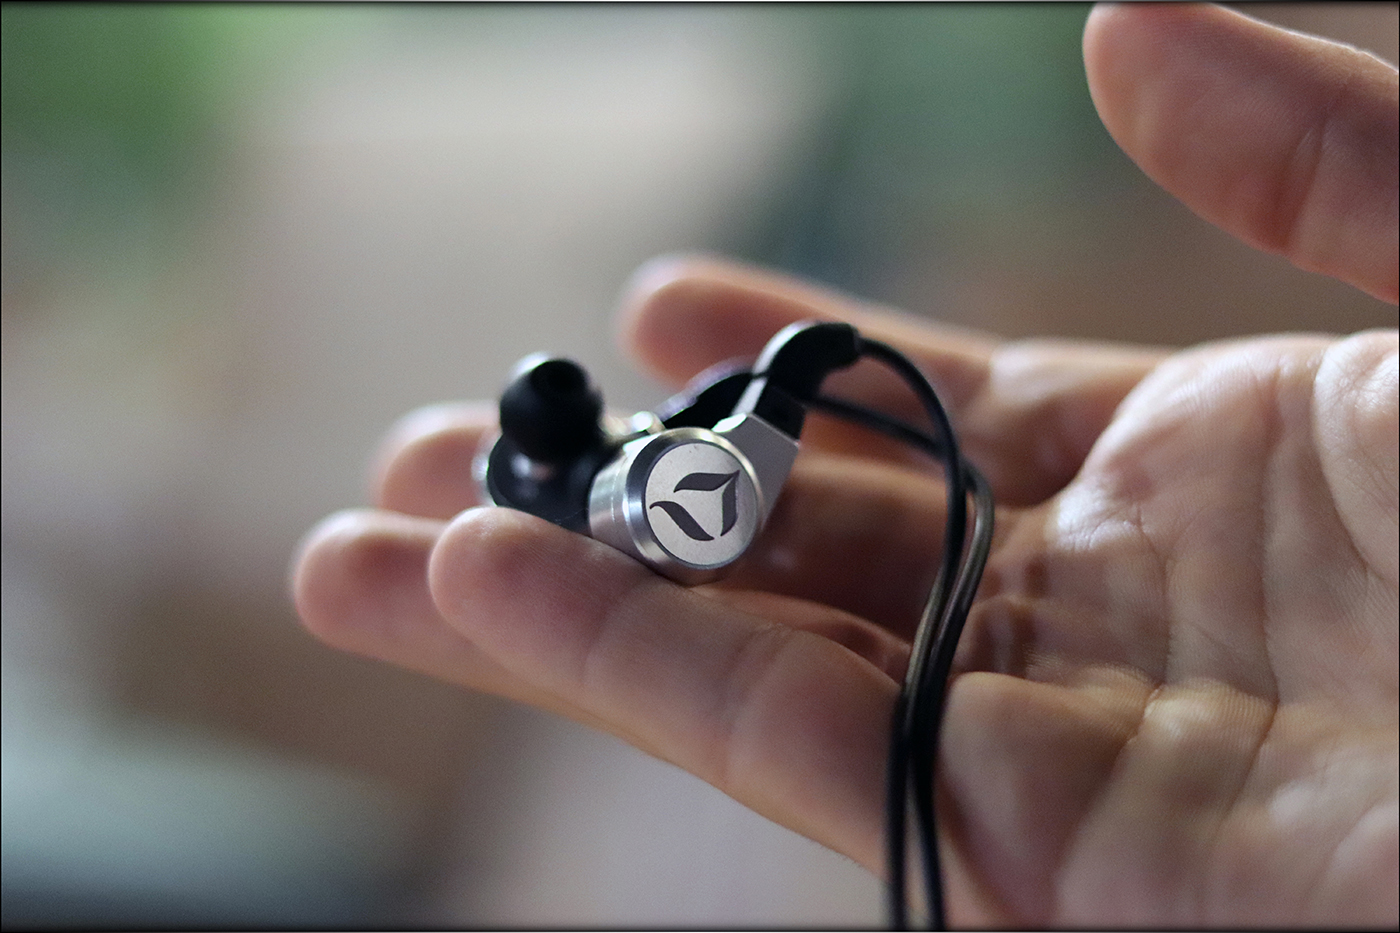 Dita-Fealty-IEMs-Earphones-Awesome-Cable-Dynamic-Driver-DD-Review-Audiophile-Heaven-27.jpg